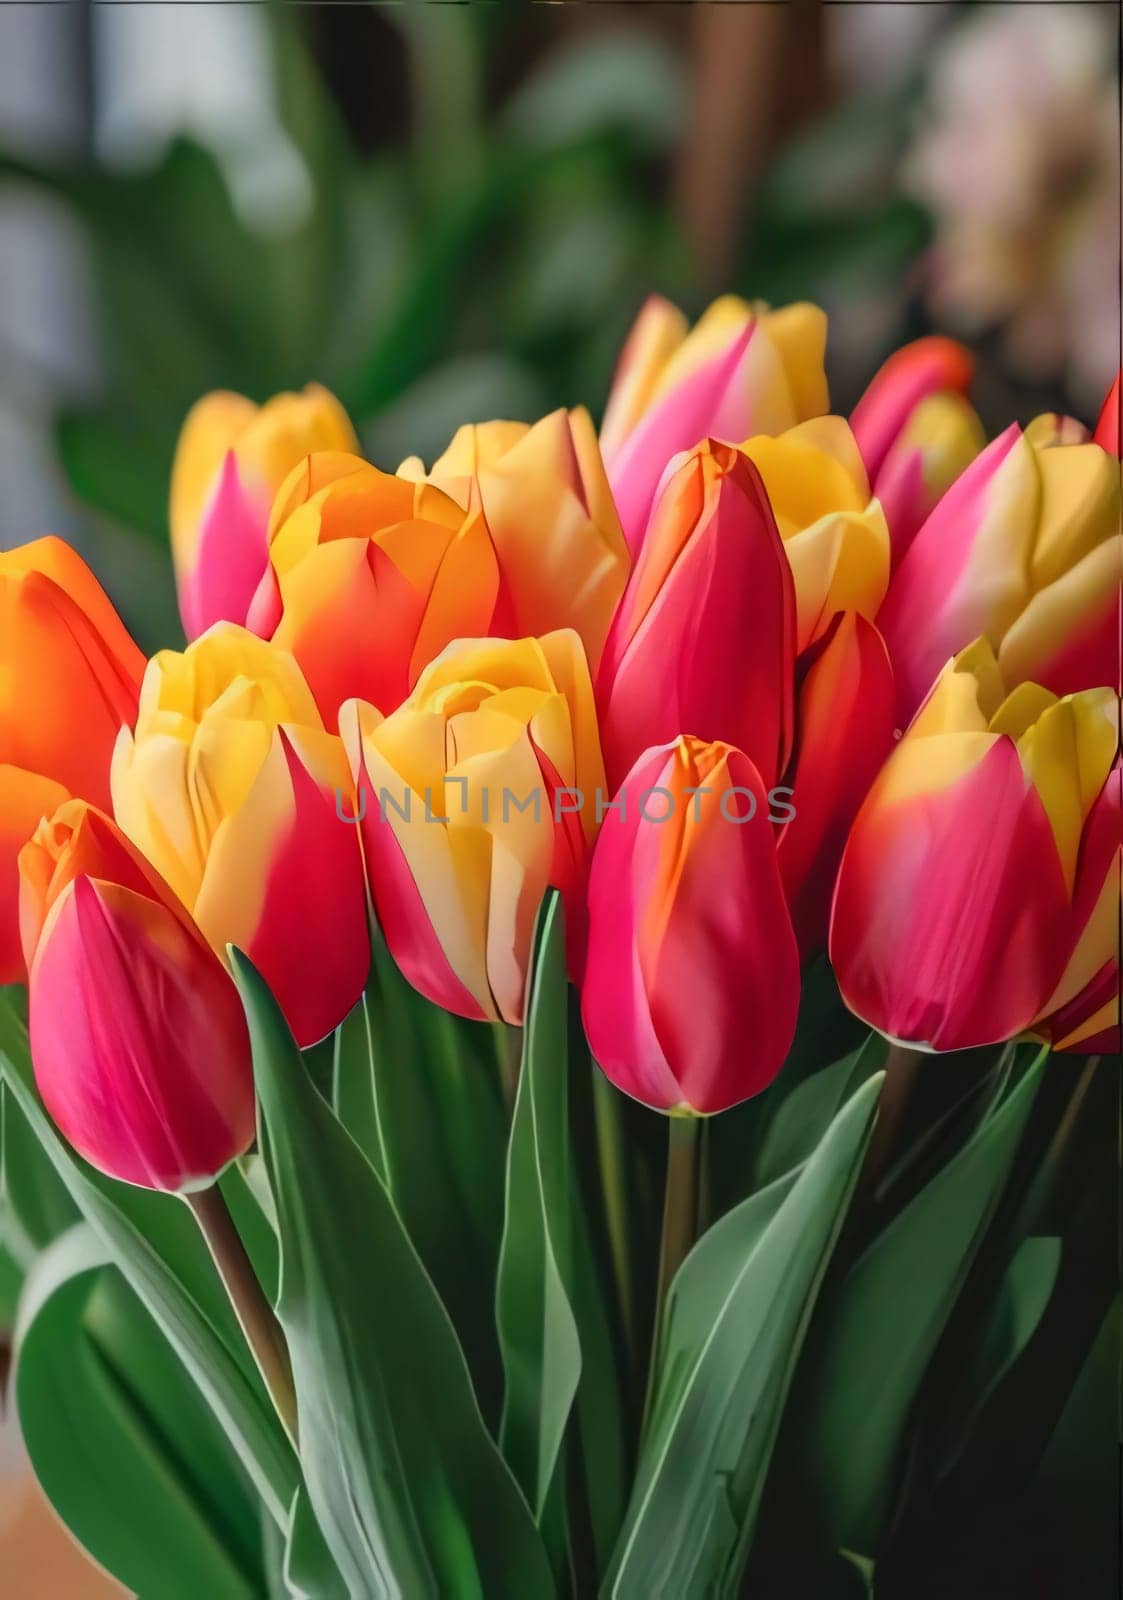 Red and orange Tulips with green leaves, smudged background, bouquet. Flowering flowers, a symbol of spring, new life. by ThemesS